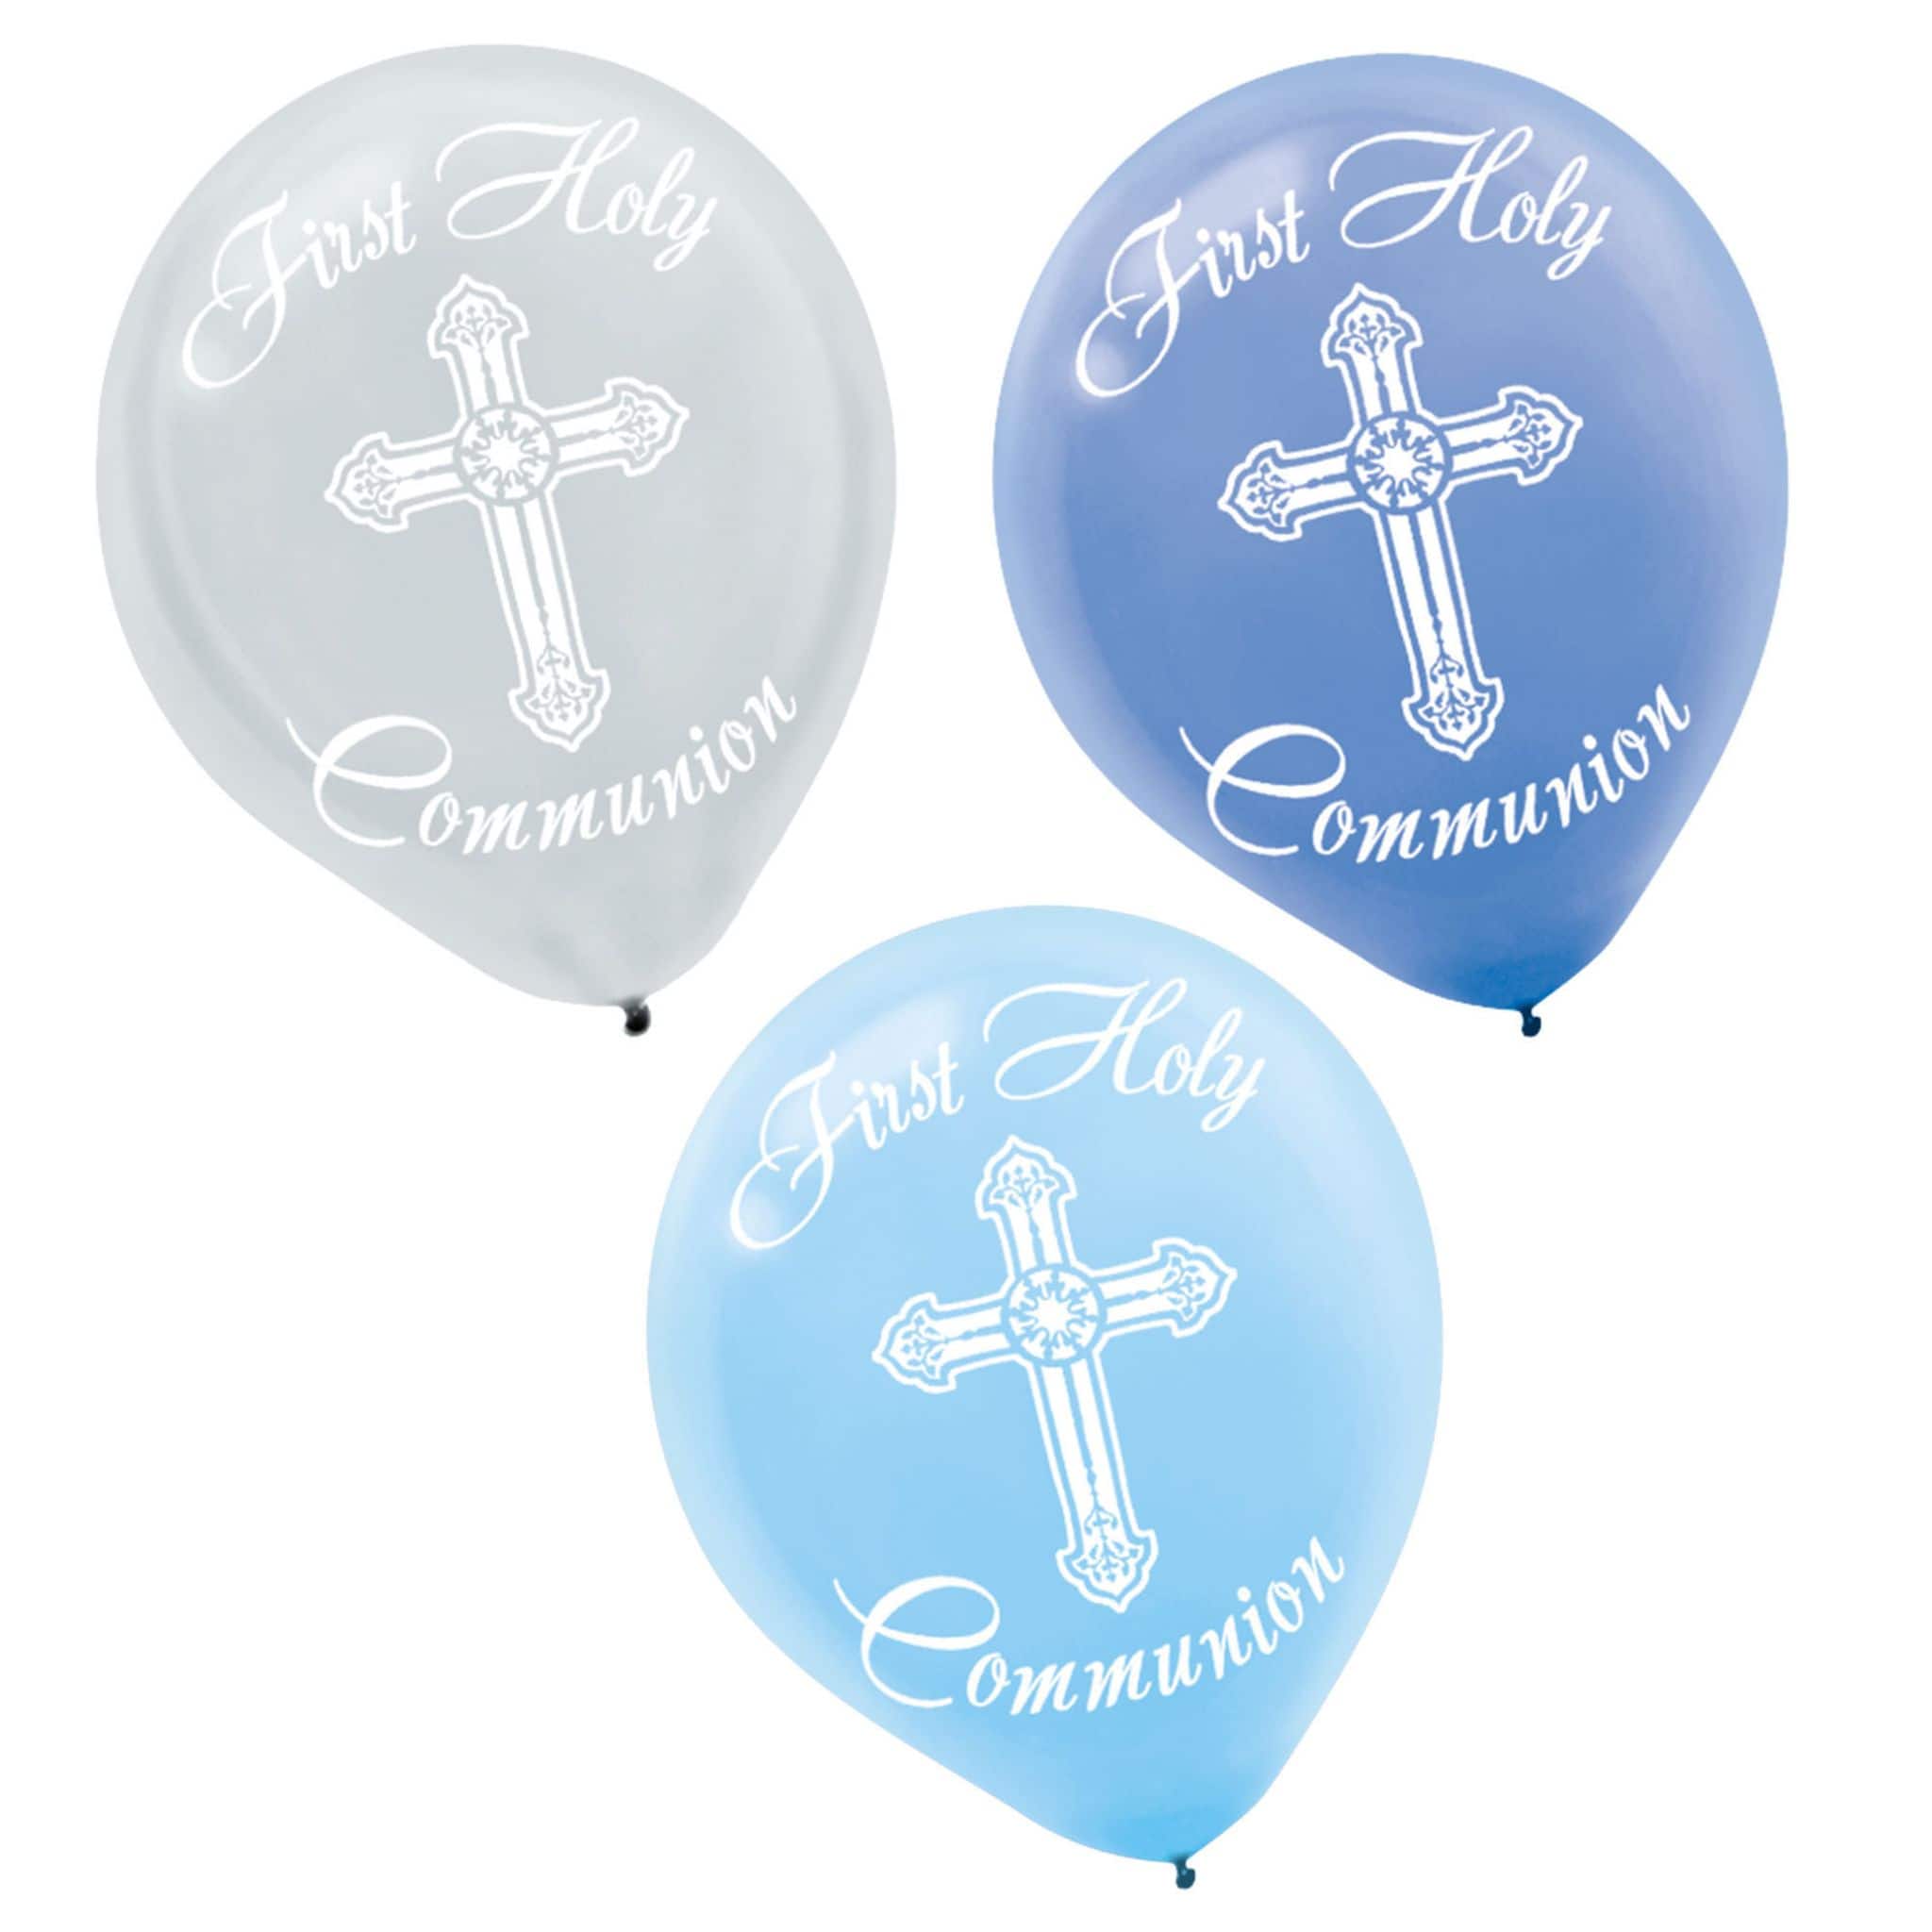 First/1st Holy Communion BLUE/BOY Qualatex Latex Foil Religious Party Balloons 